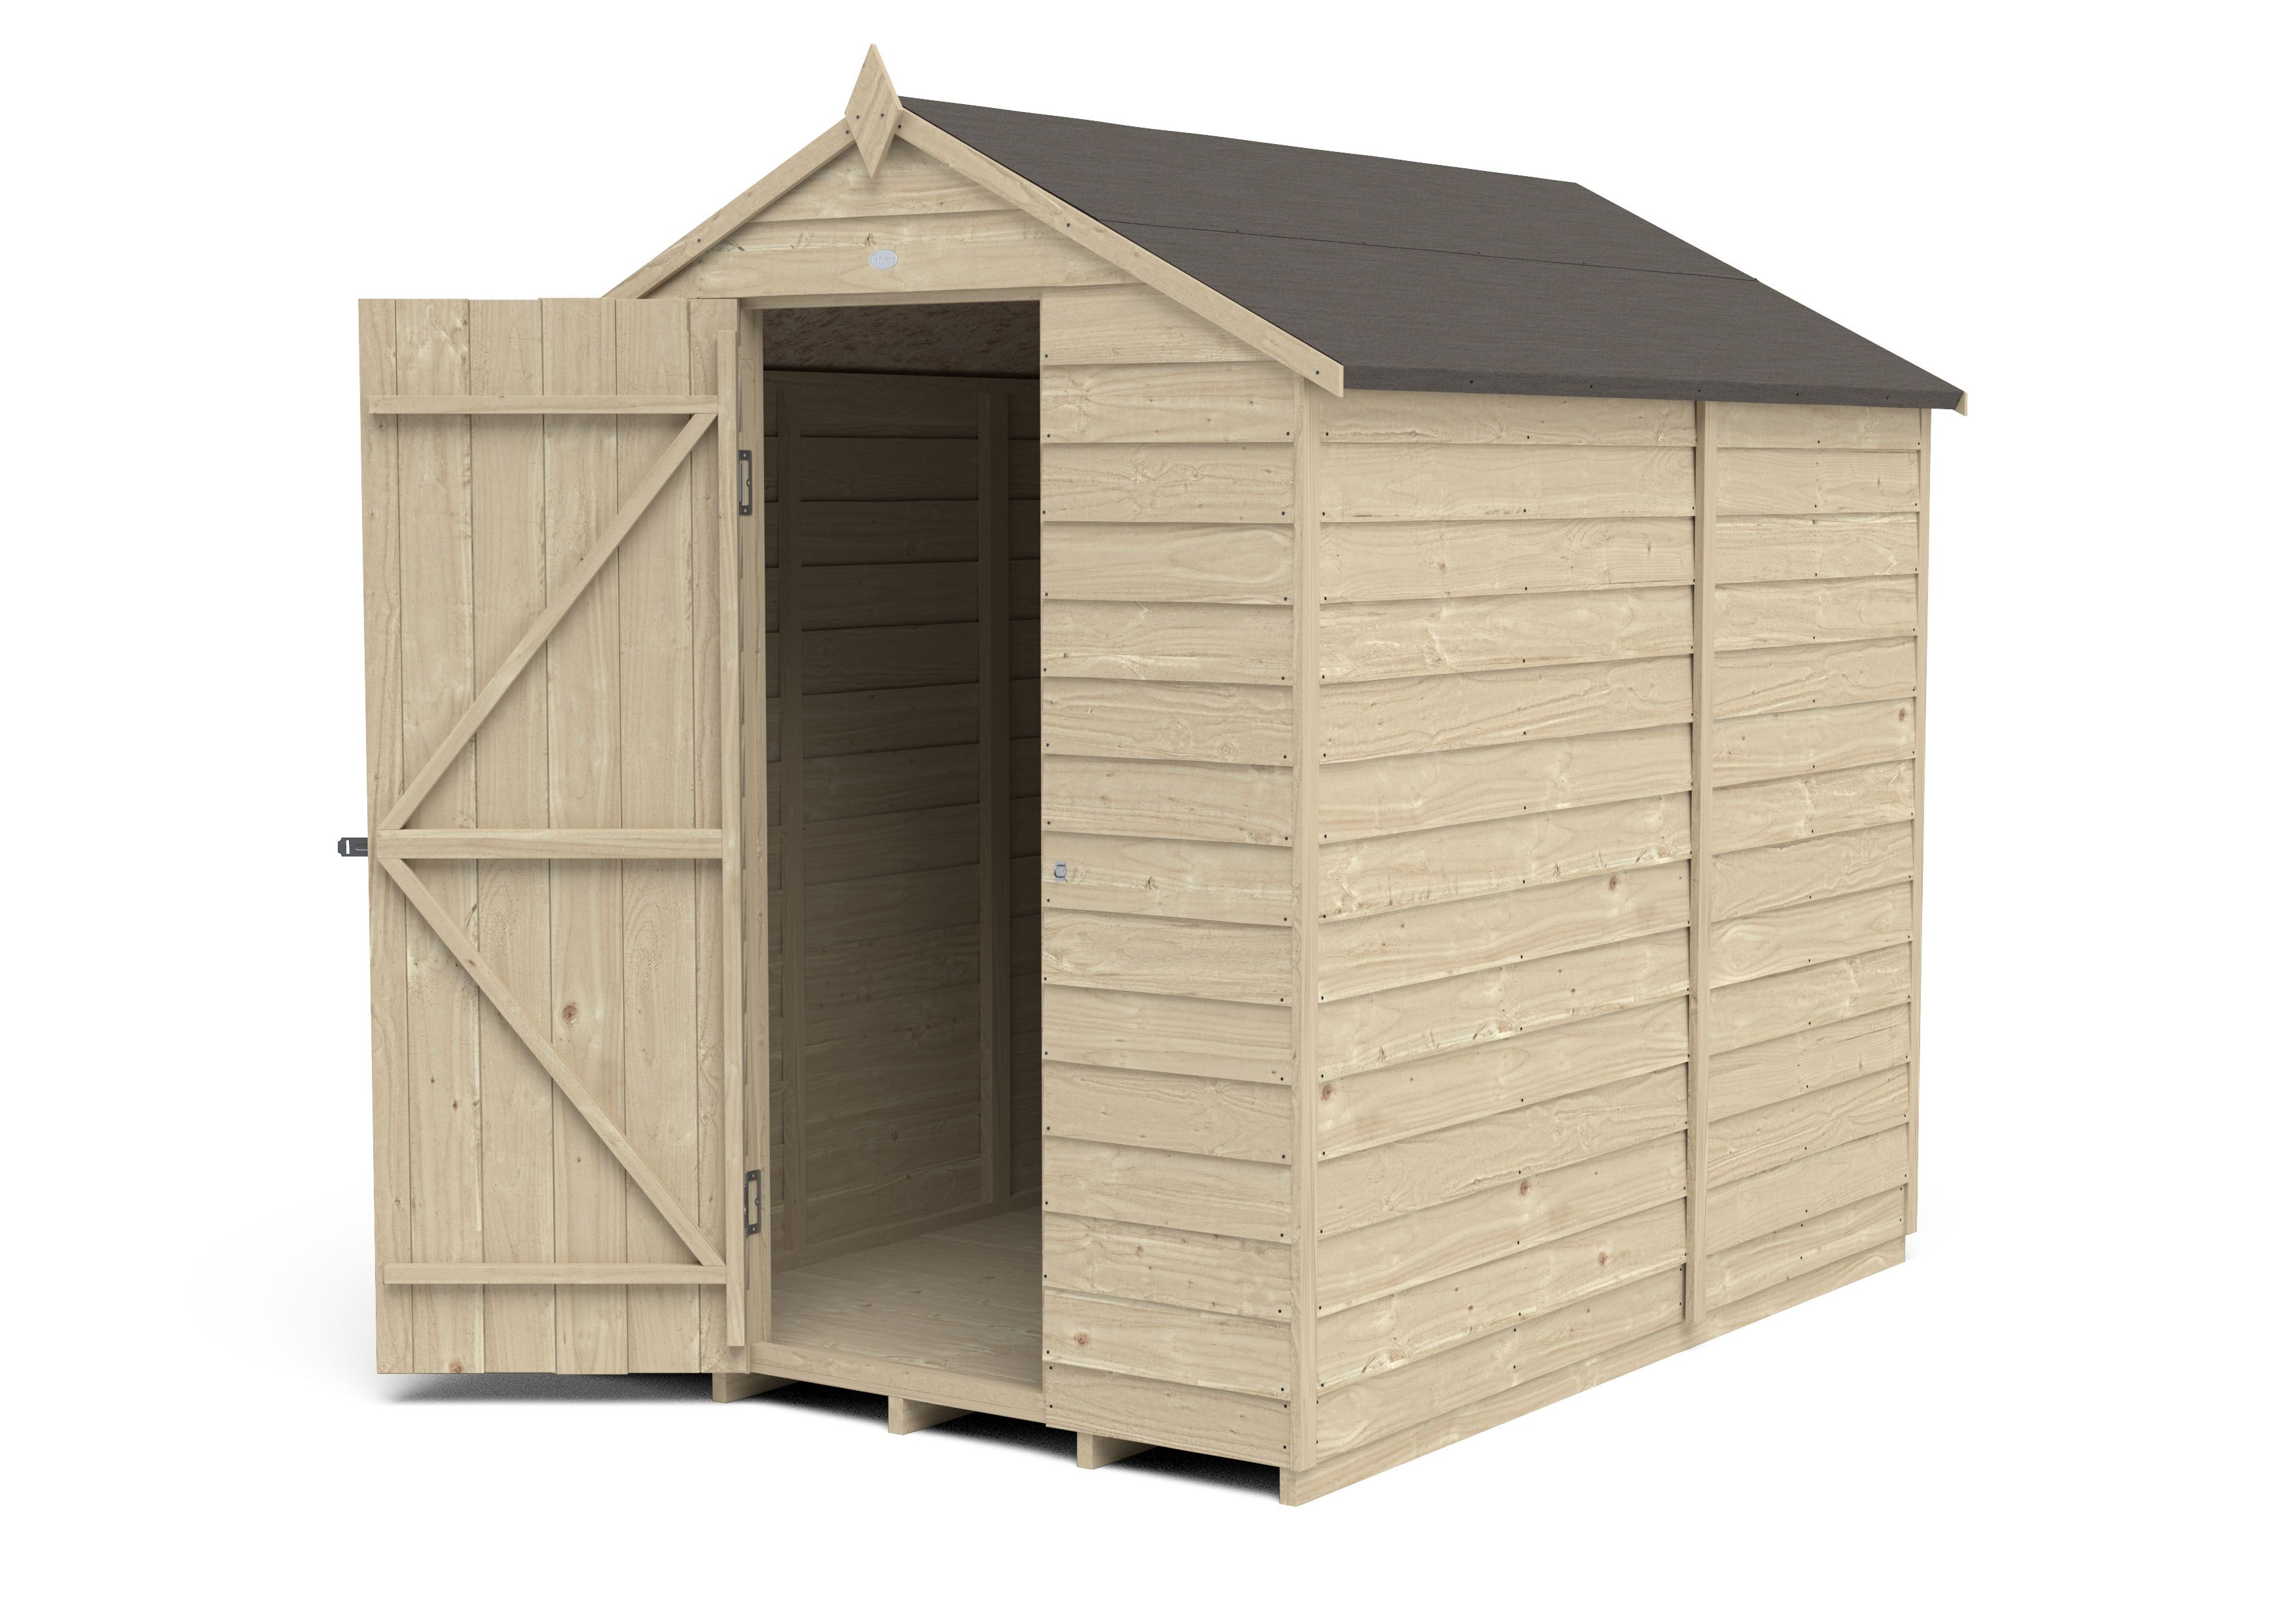 Forest Garden Overlap 7x5 ft Apex Wooden Pressure treated Shed with floor - Assembly service included